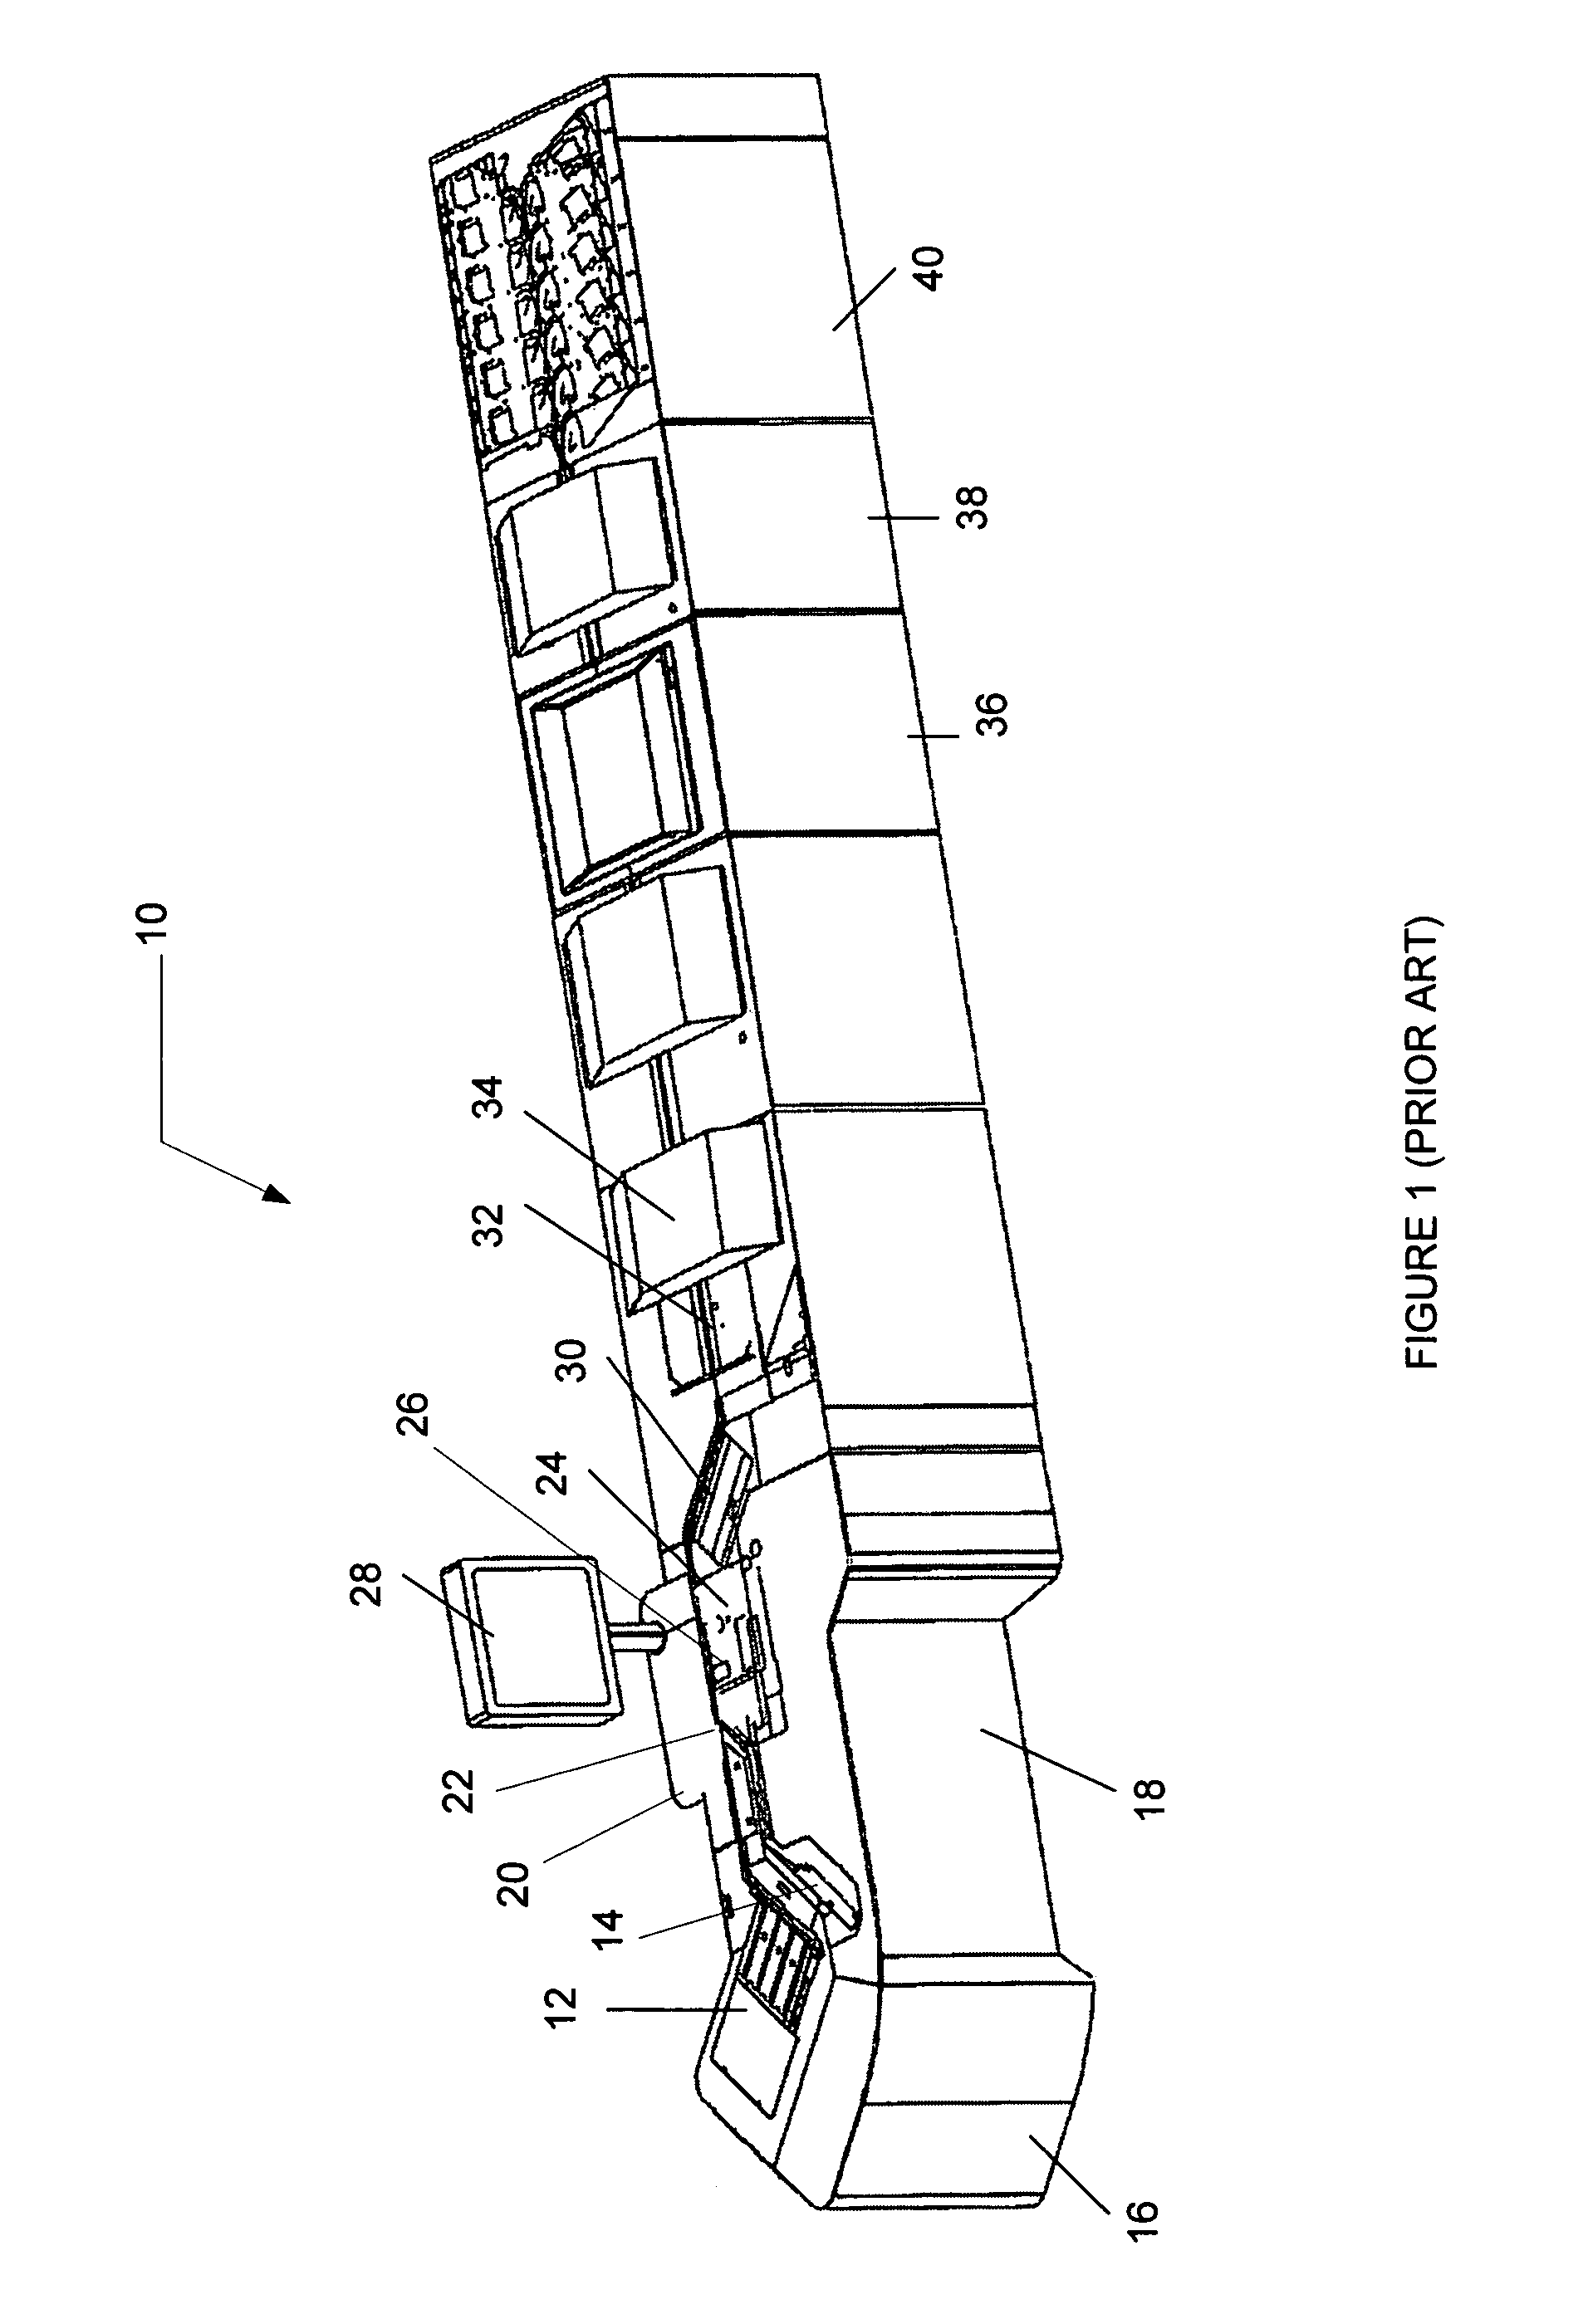 Document processing system with track allowing selective reprocessing of documents